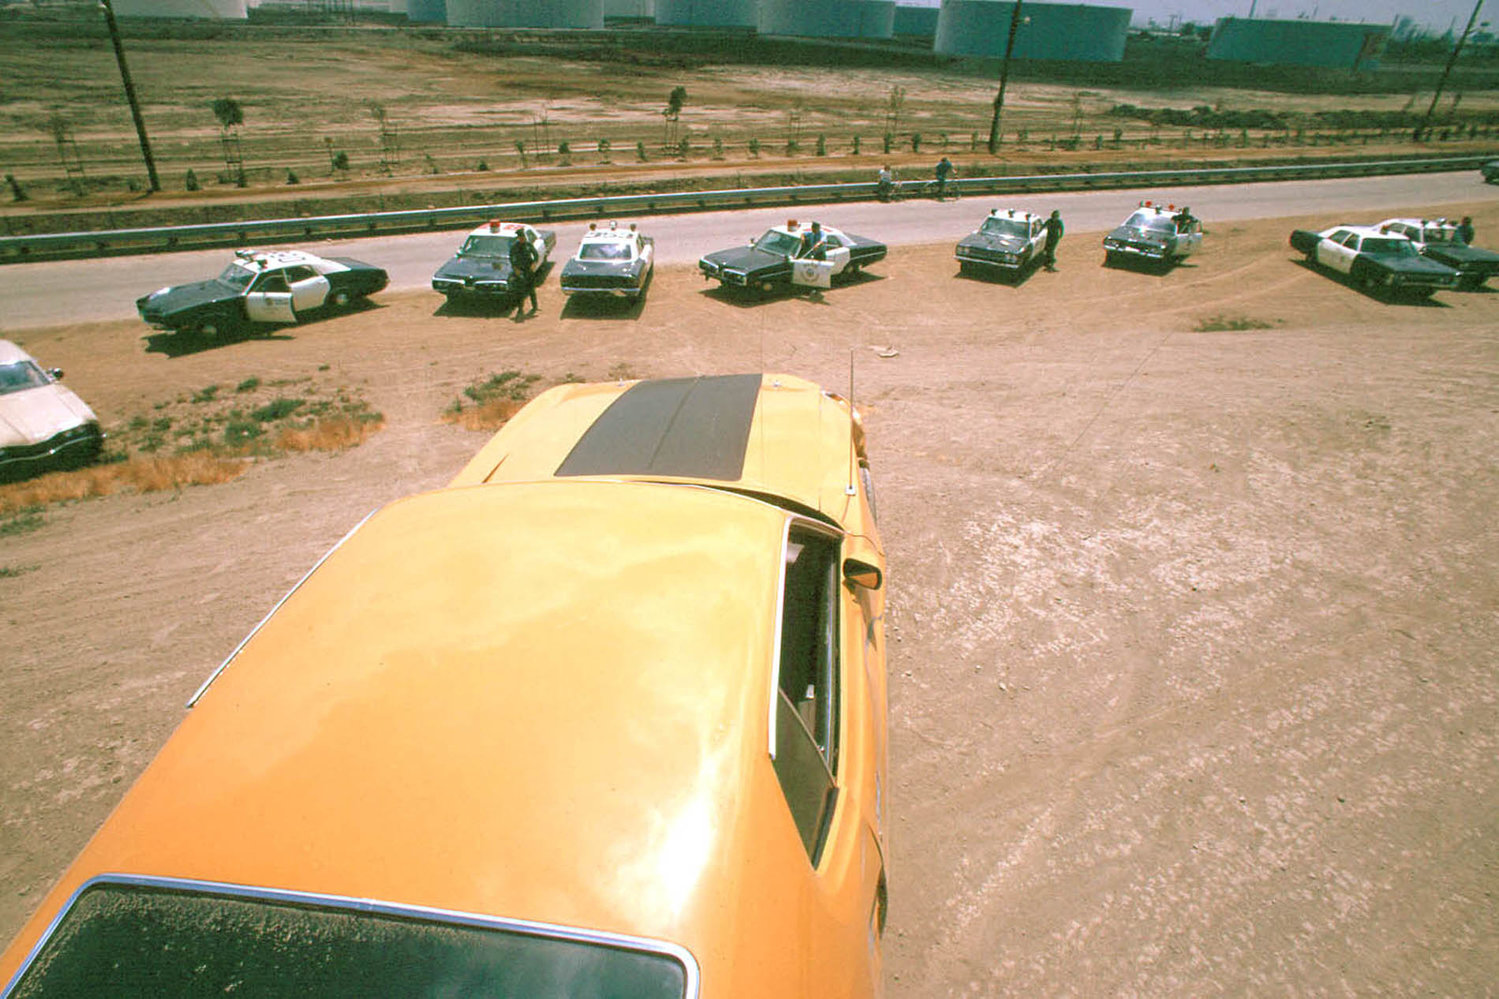 Images from the filming of the 1974 cult classic “Gone in 60 Seconds” were provided to The Chronicle by producer Michael Leone.